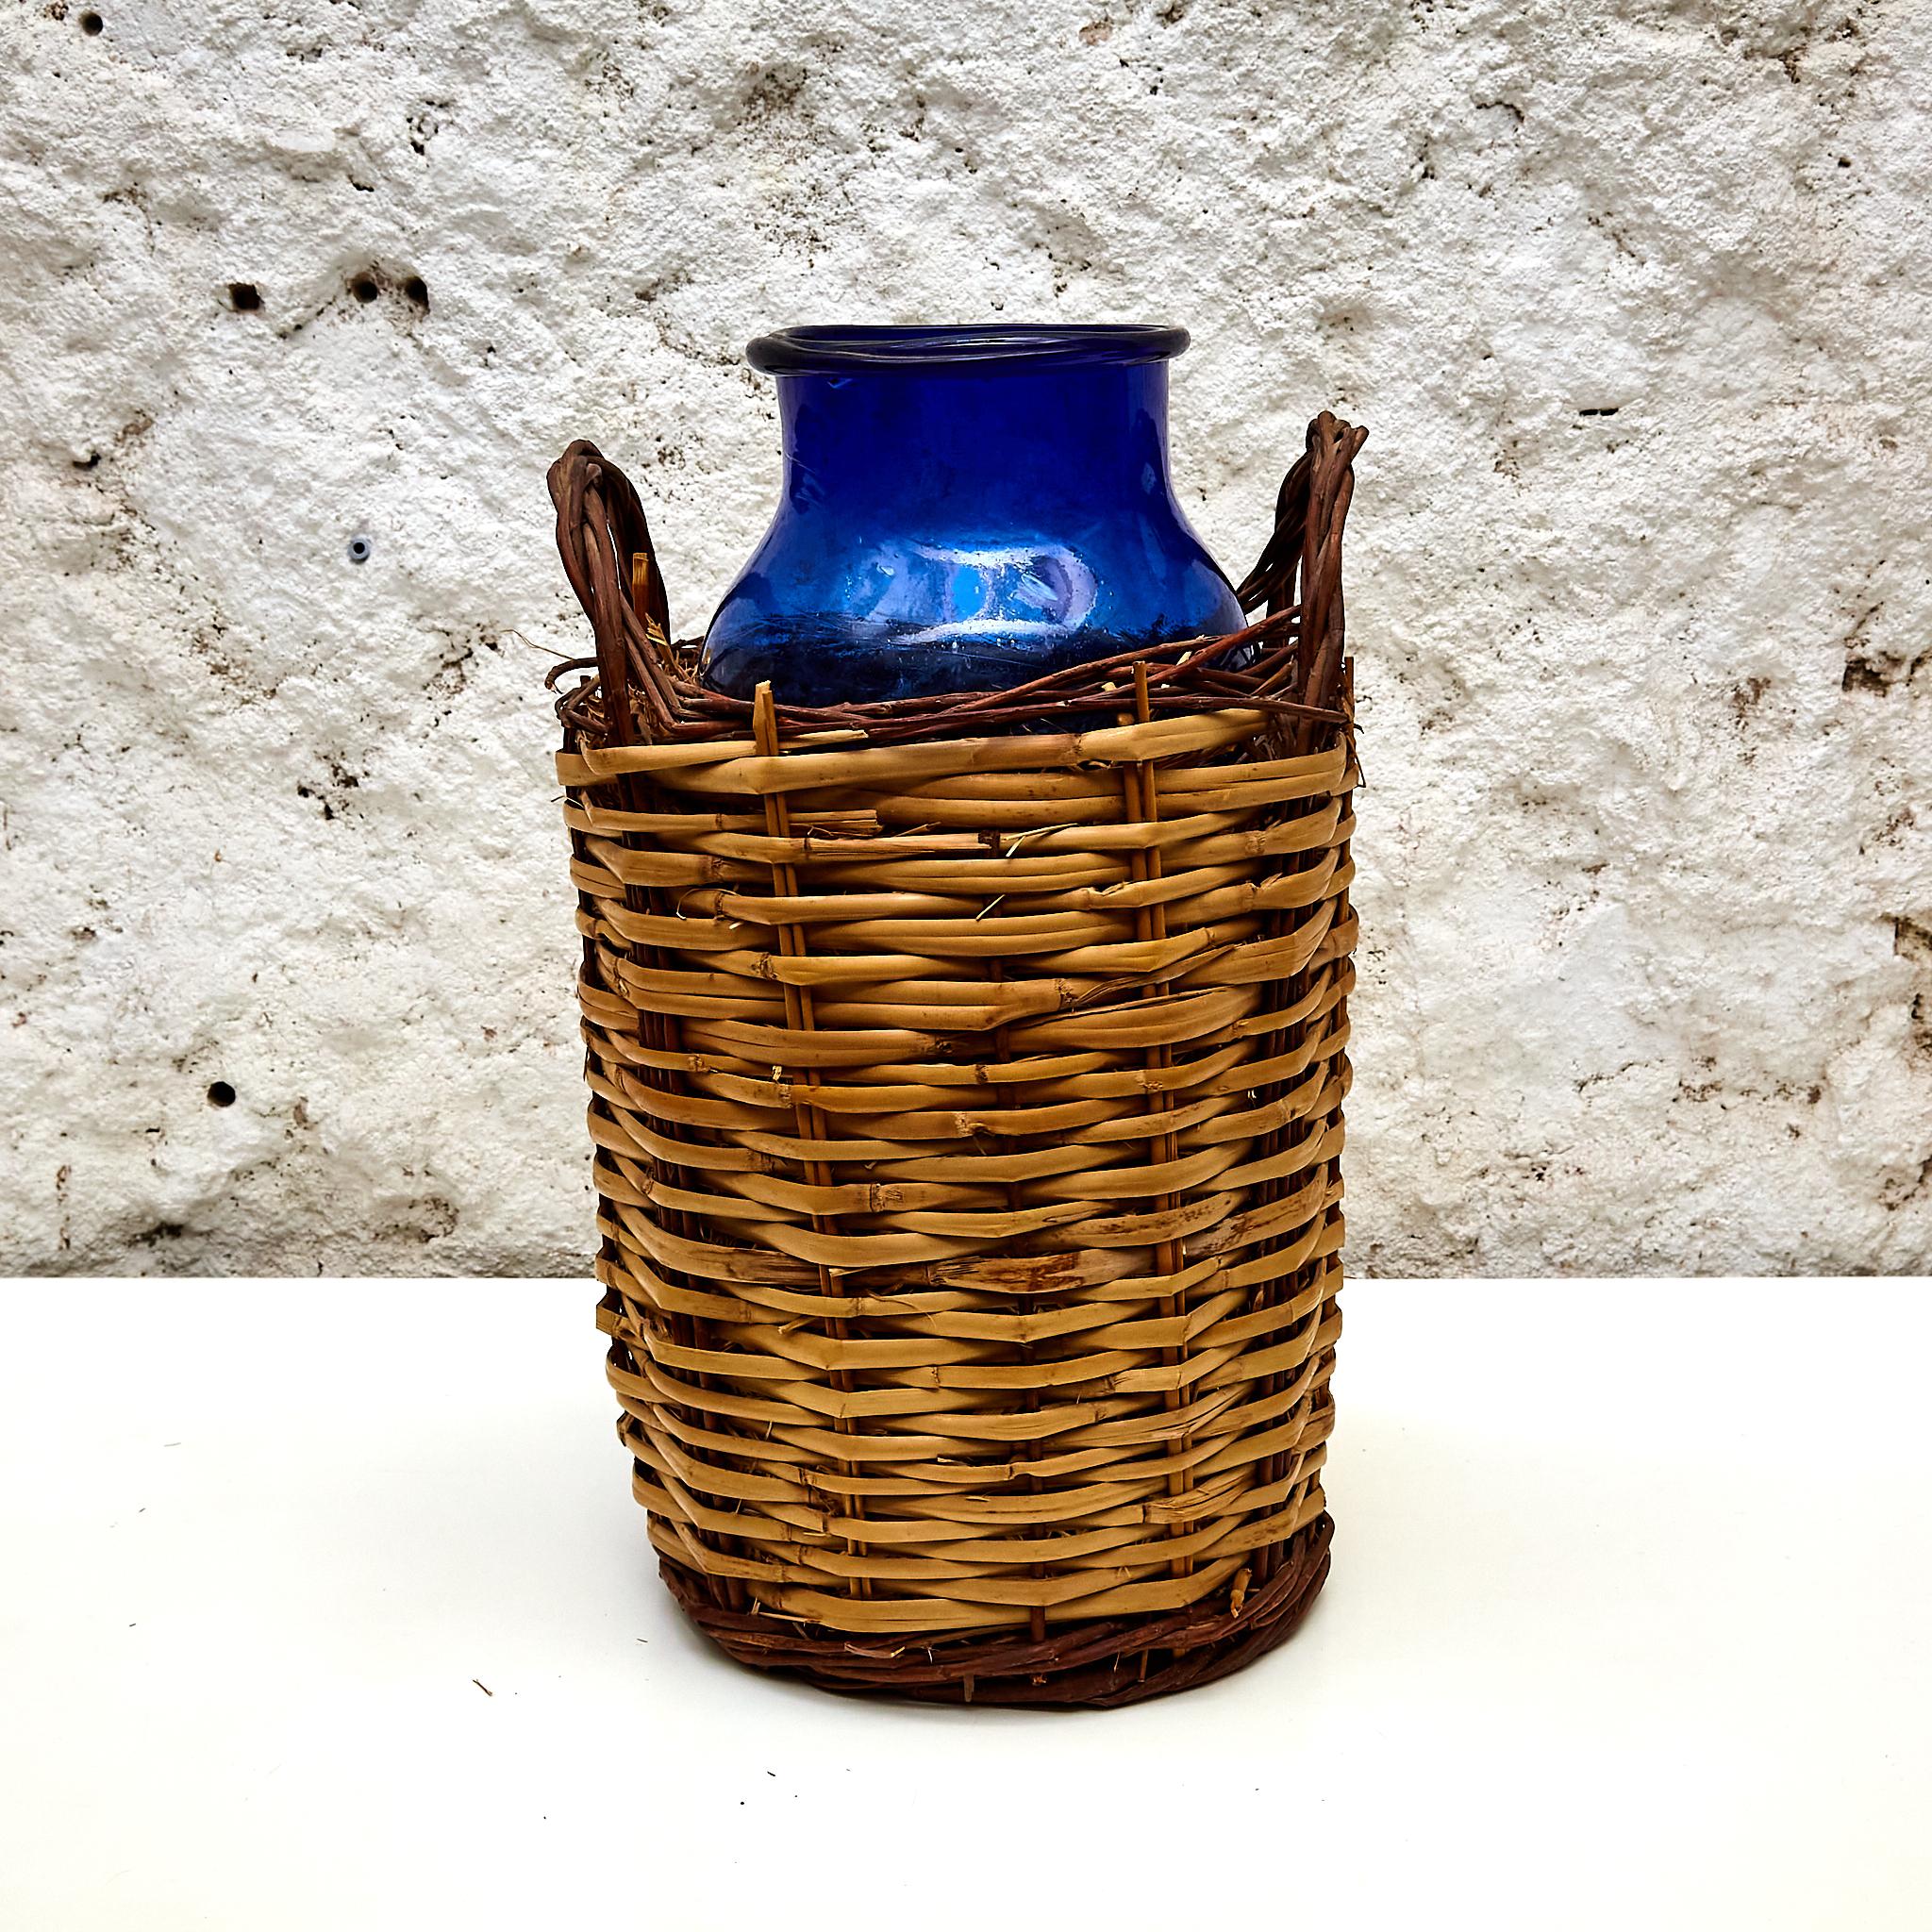 Mid-20th Century Blue Glass Bottle with Wicker Basket, circa 1930